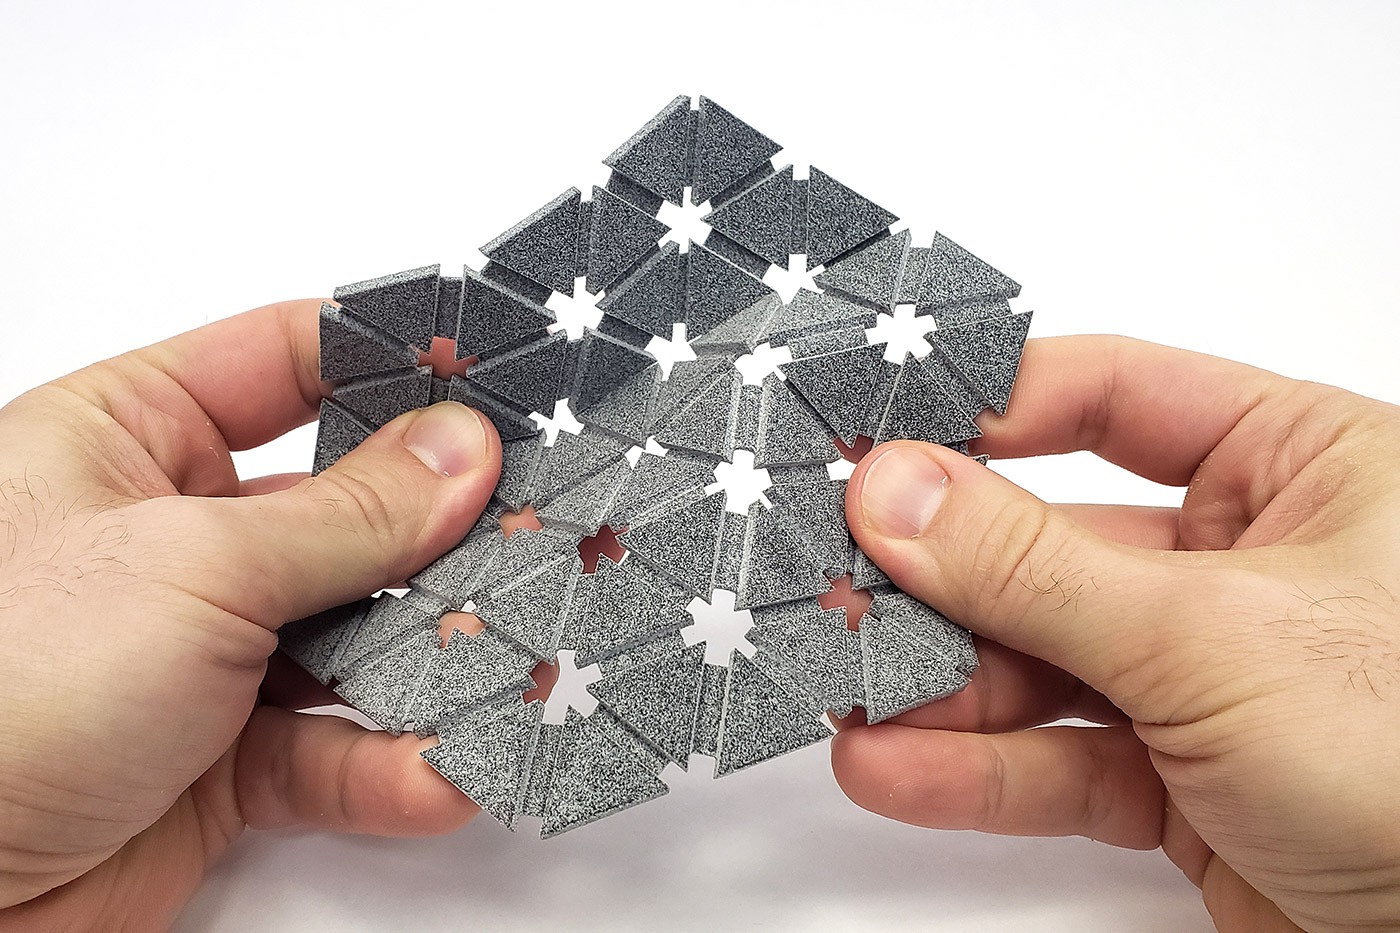 Two hands hold a piece of 3D printed fabric.